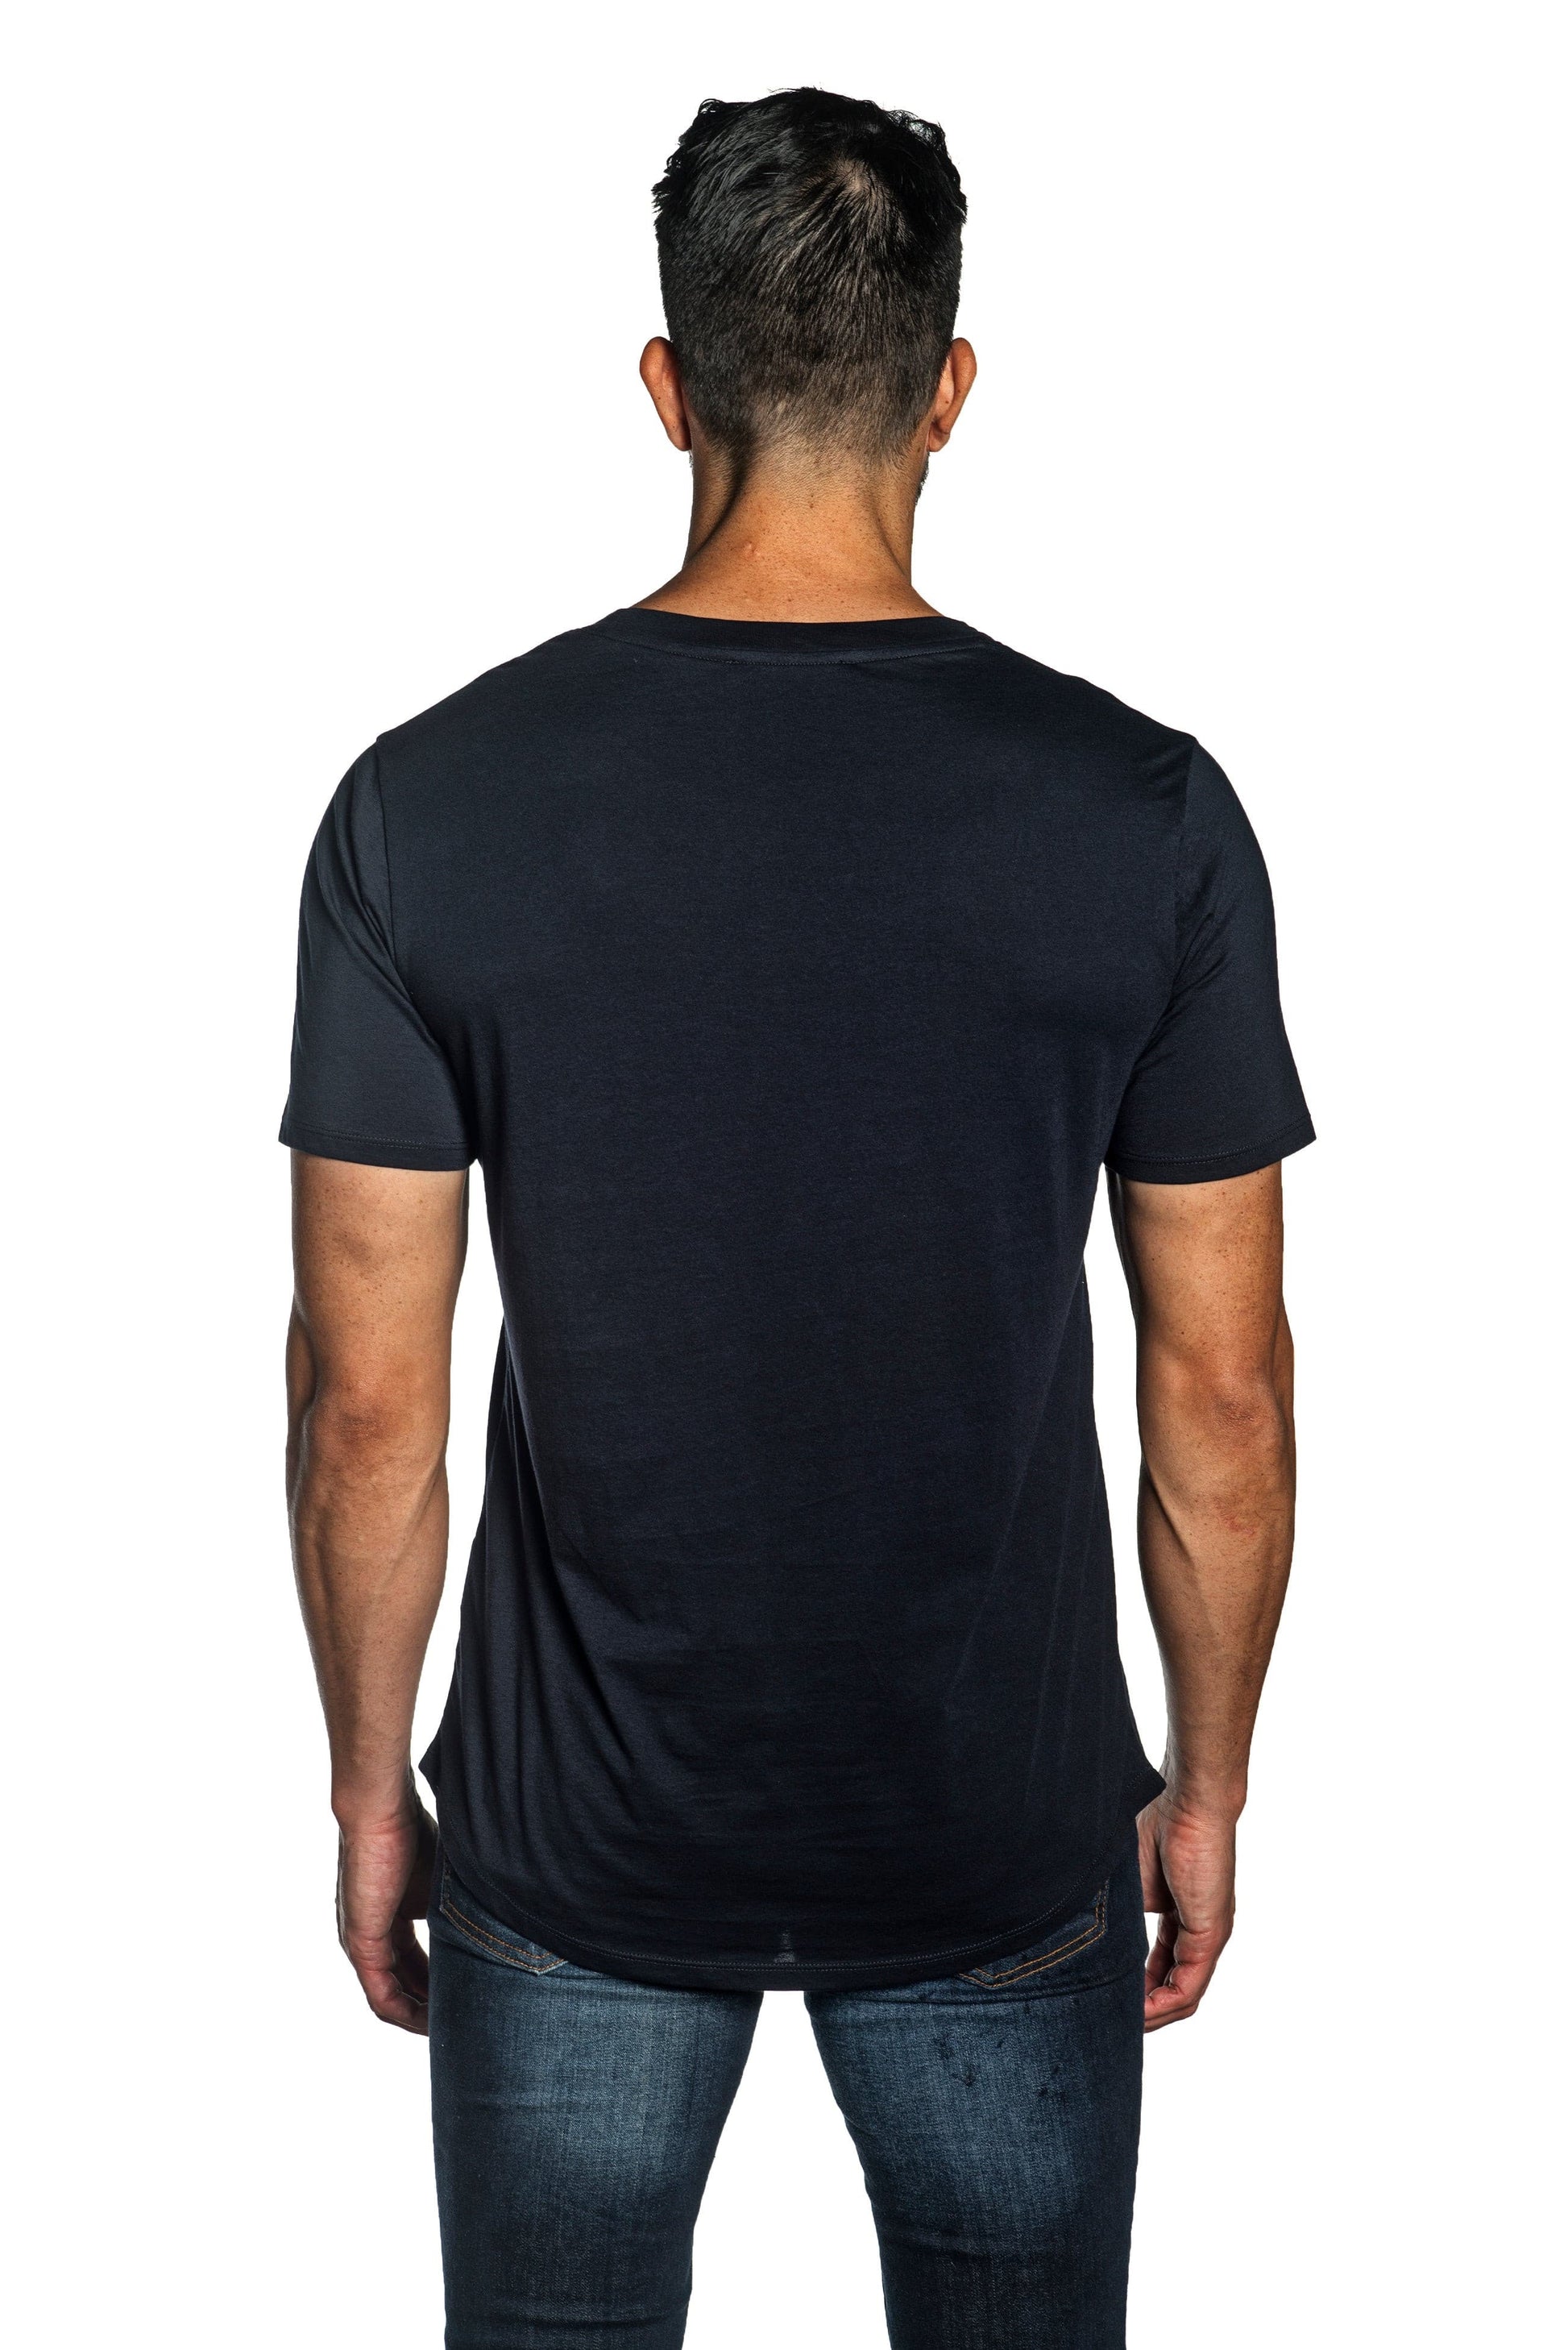 Navy Blue Mens Tee With Star Embroidery TEE-26.